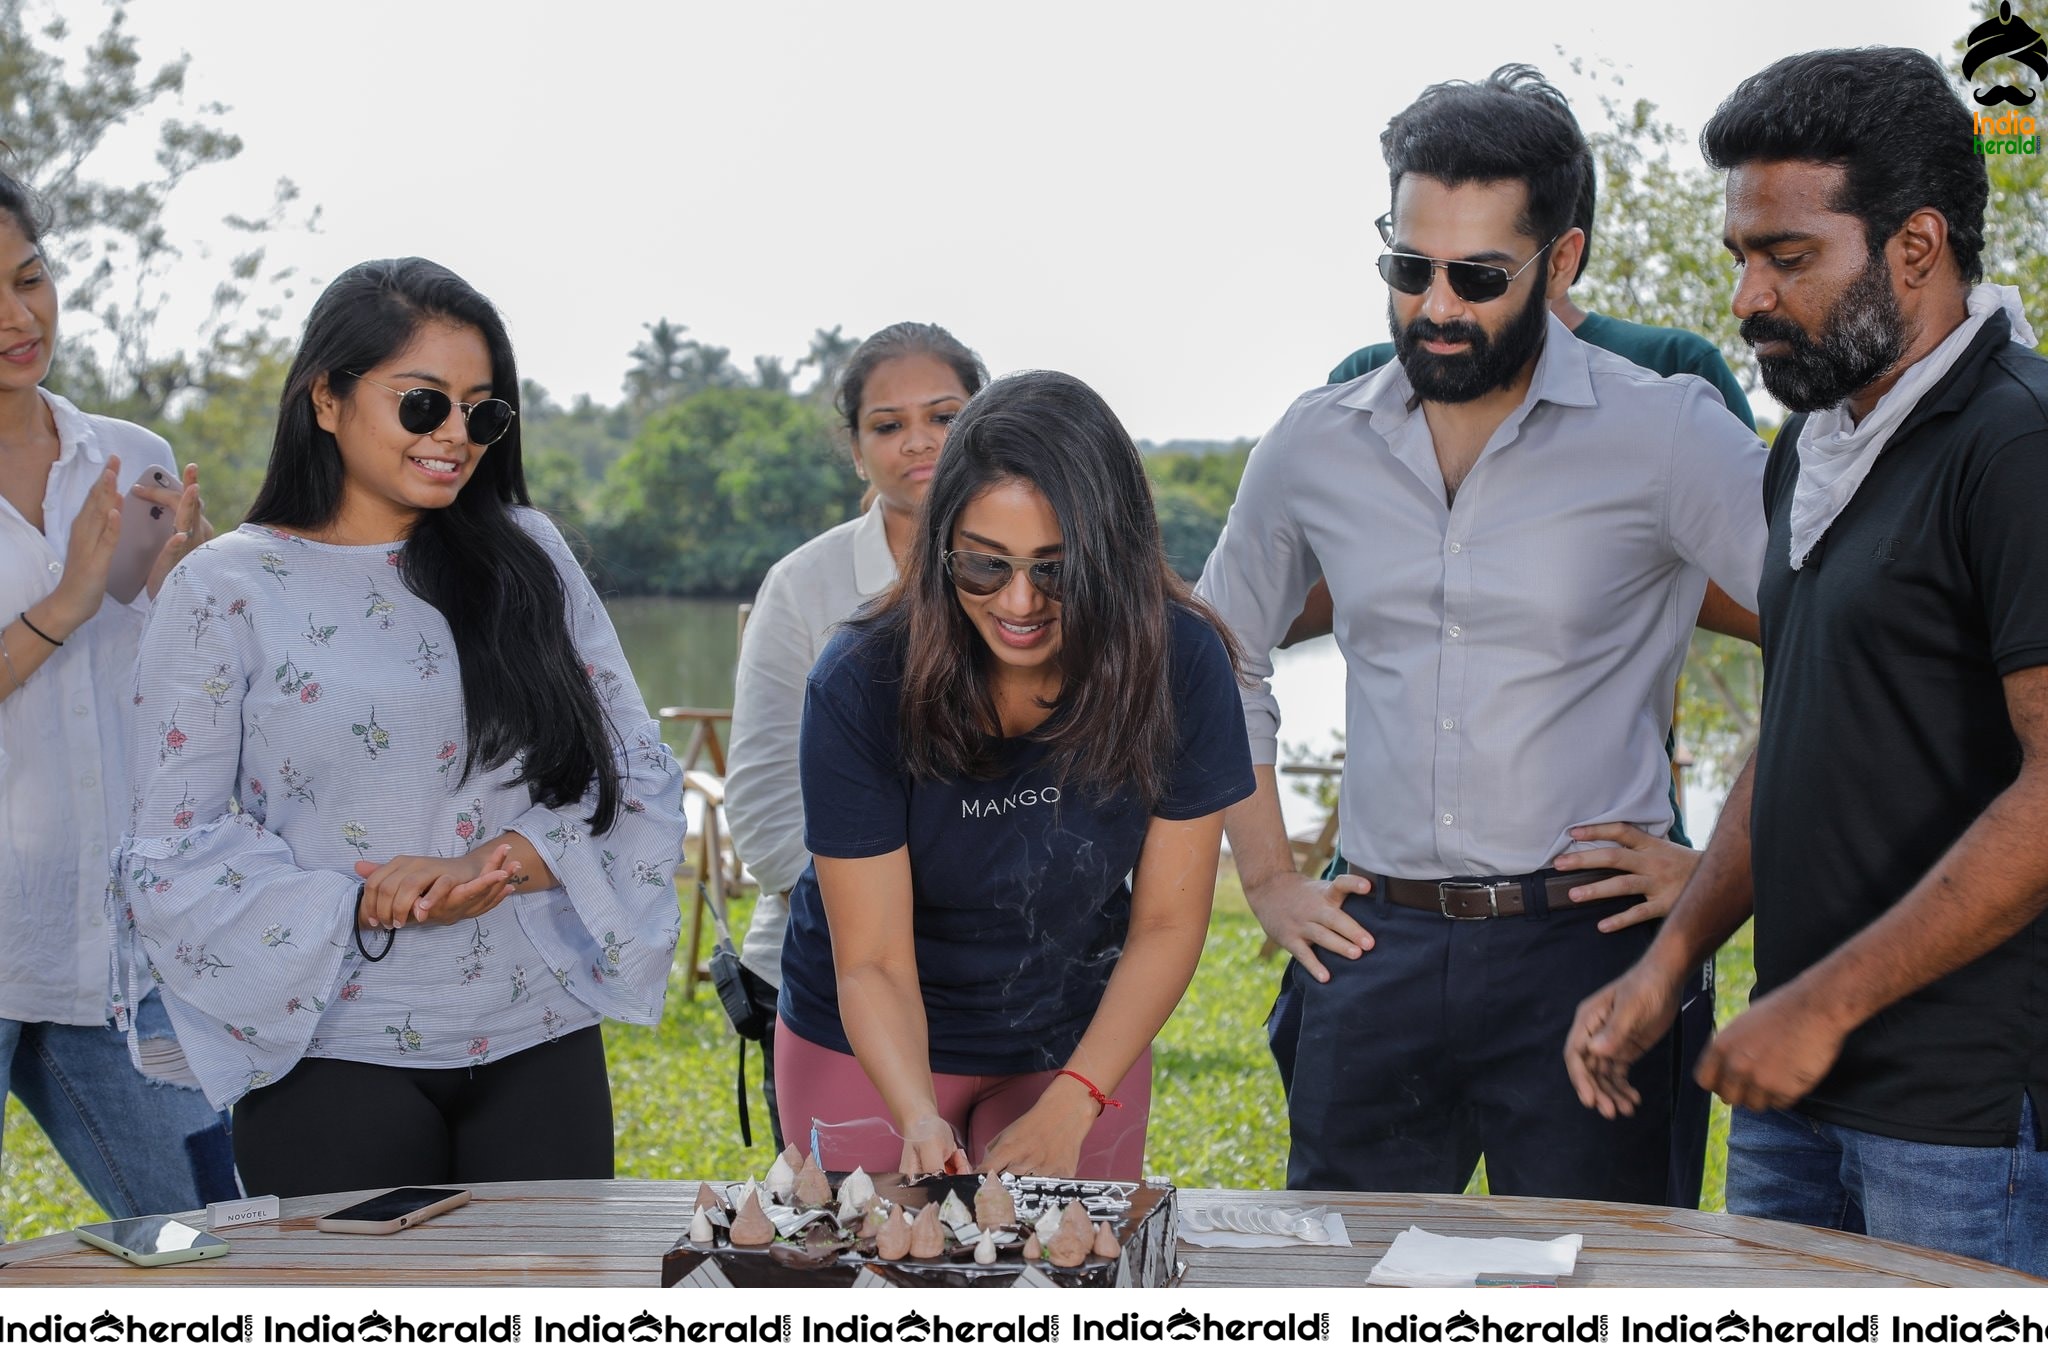 Nivetha Pethuraj celebrated her Birthday with Team RED